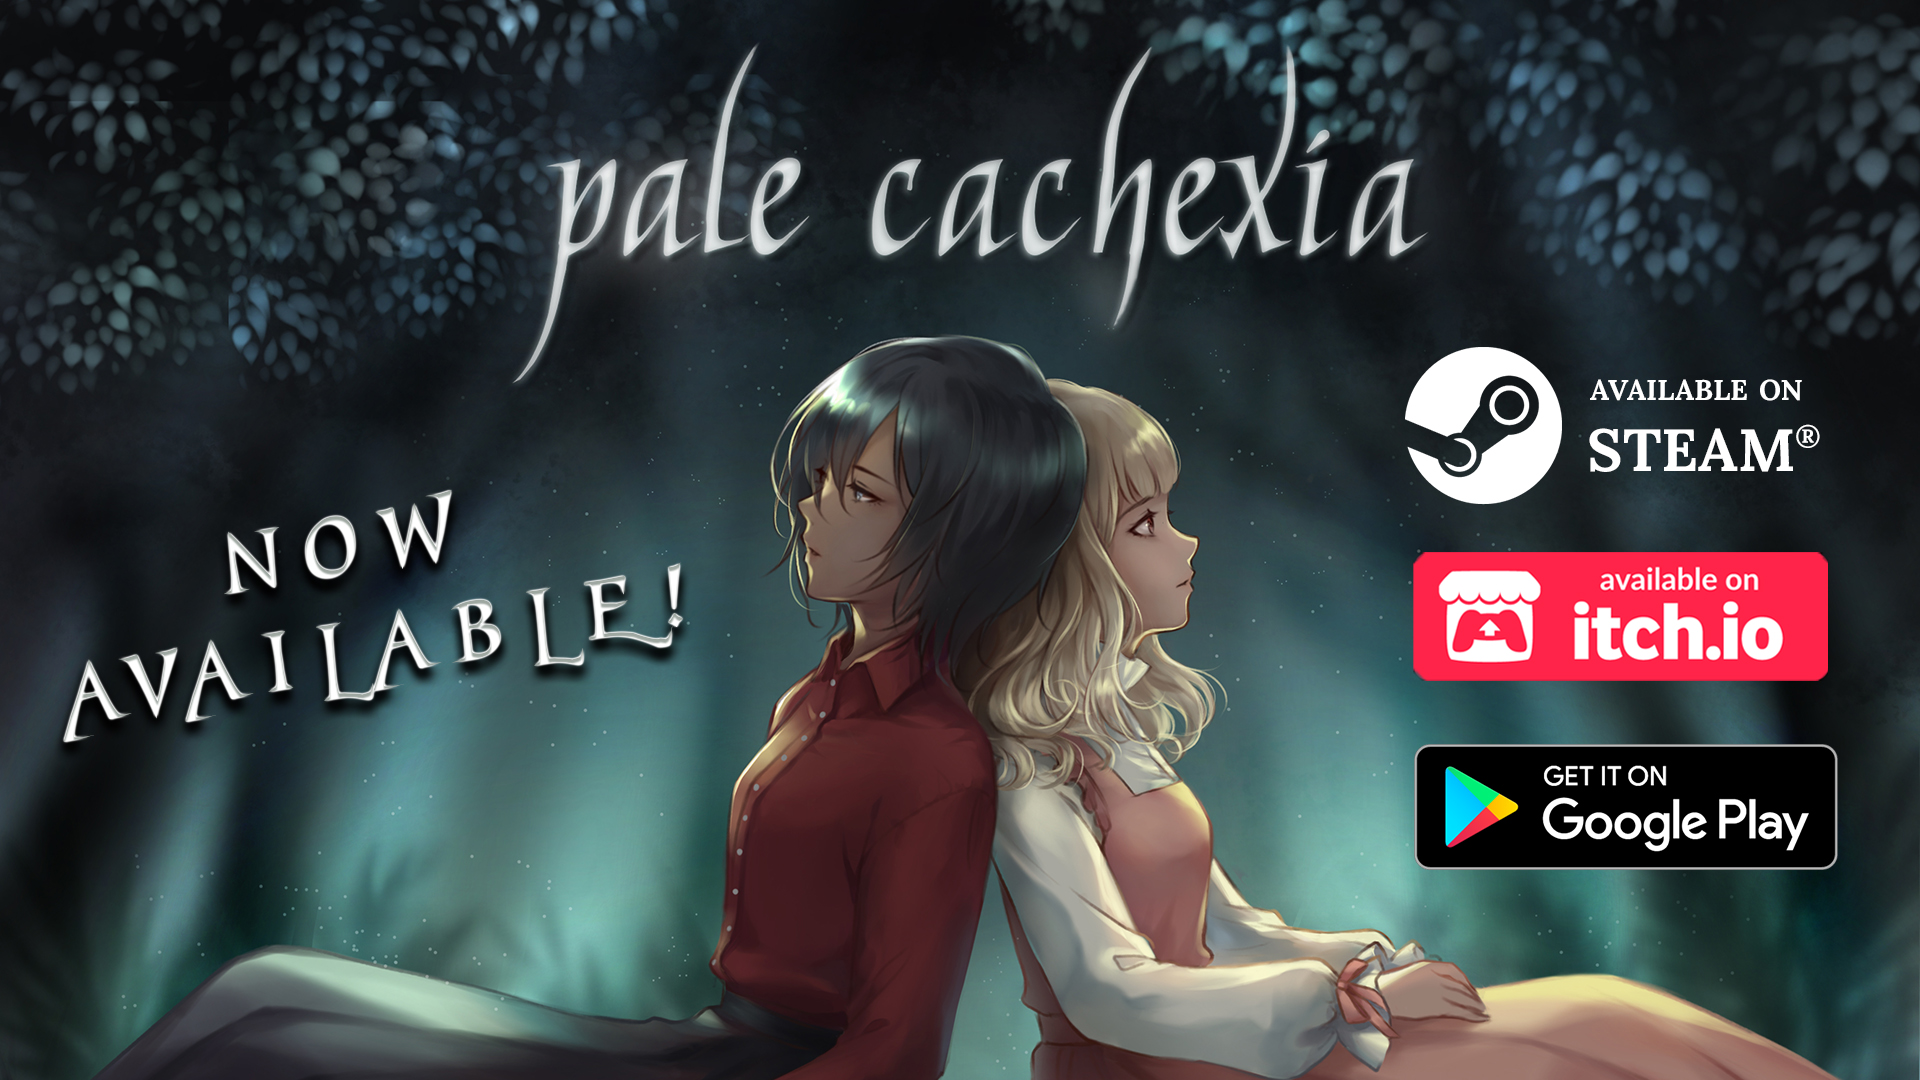 Pale Cachexia now available on Steam, Itch.io, and Google Play